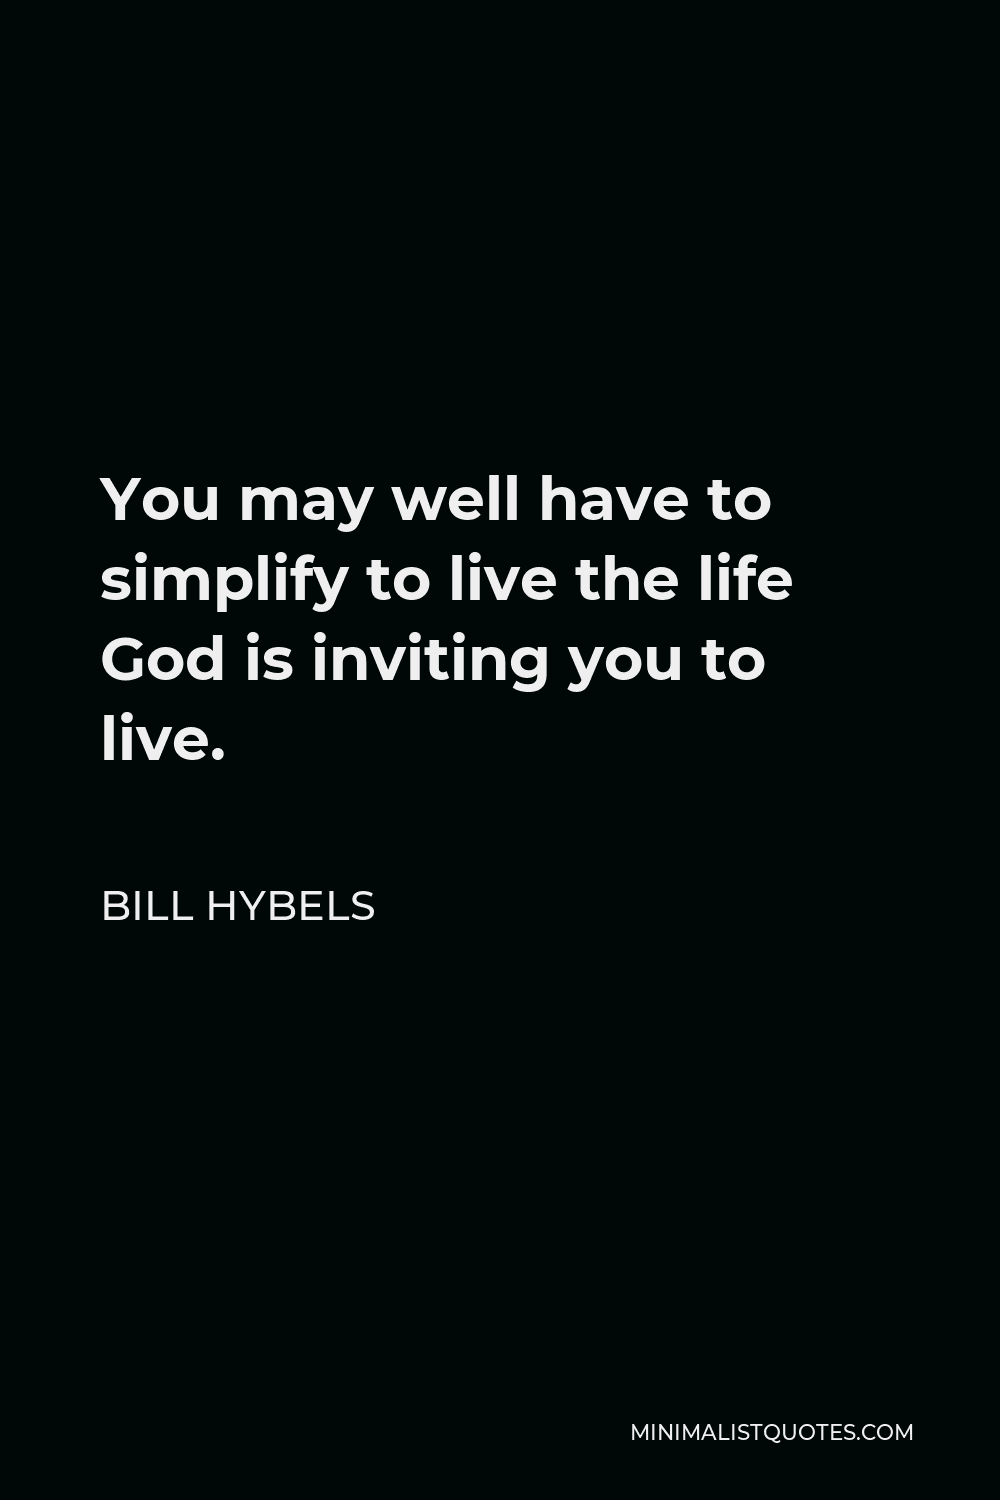 Bill Hybels Quote - You may well have to simplify to live the life God is inviting you to live.